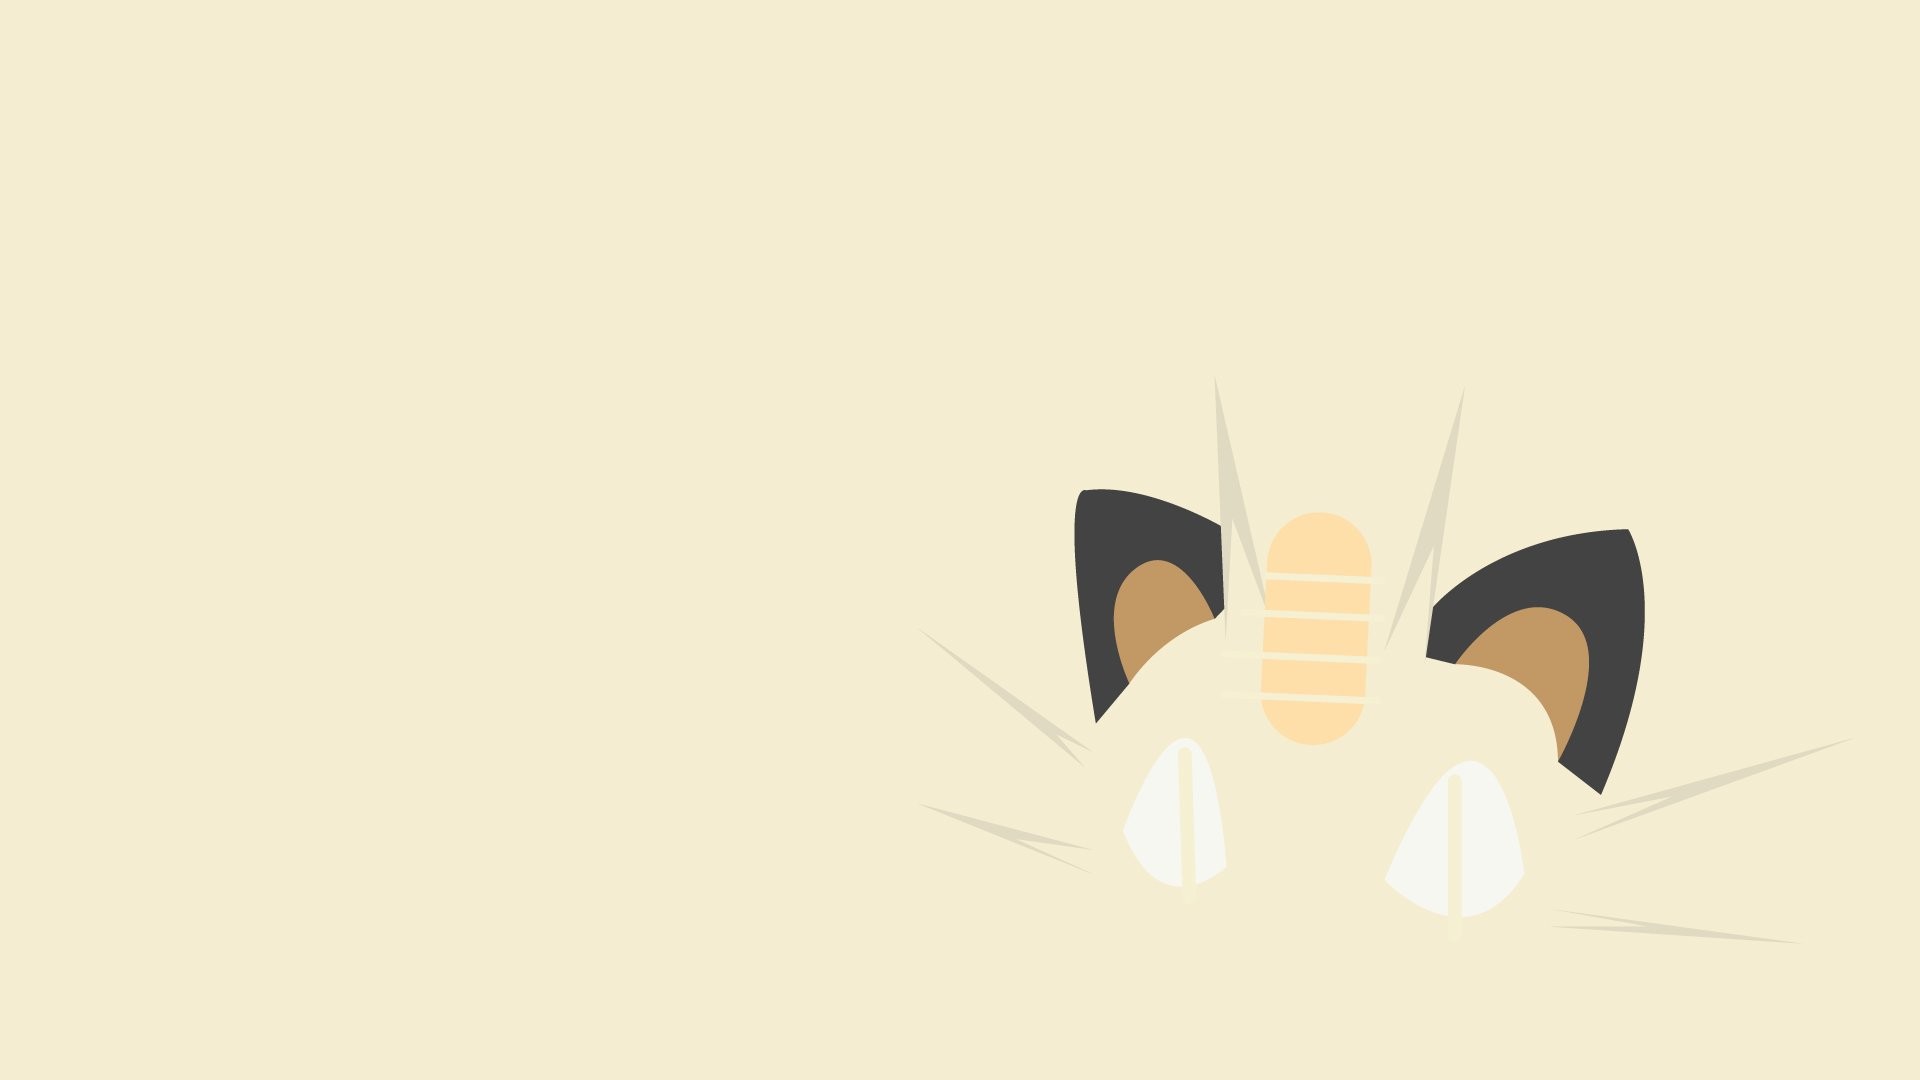 Meowth Wallpapers.